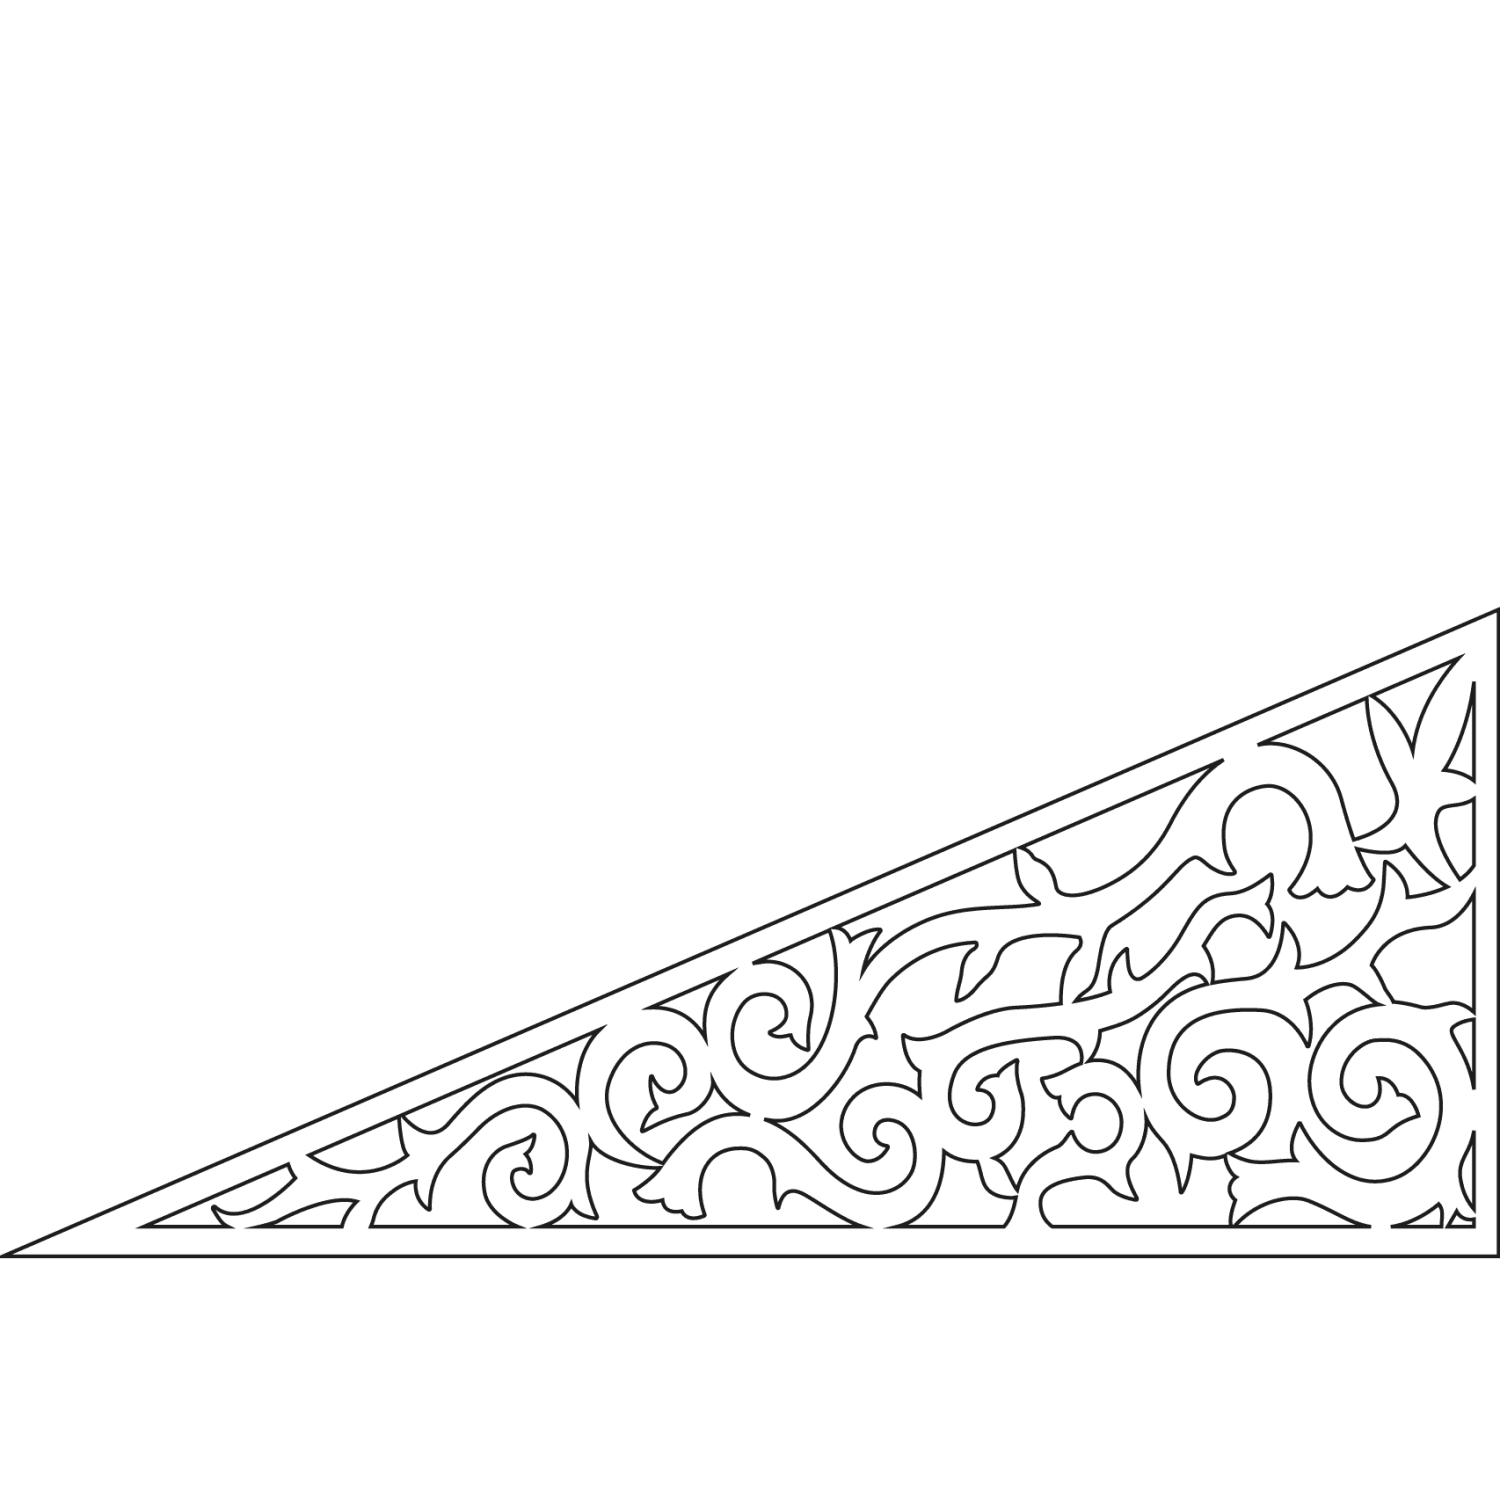 Gable infill 030 - Outline of a decorative victorian millwork as house decoration for roof and gable end